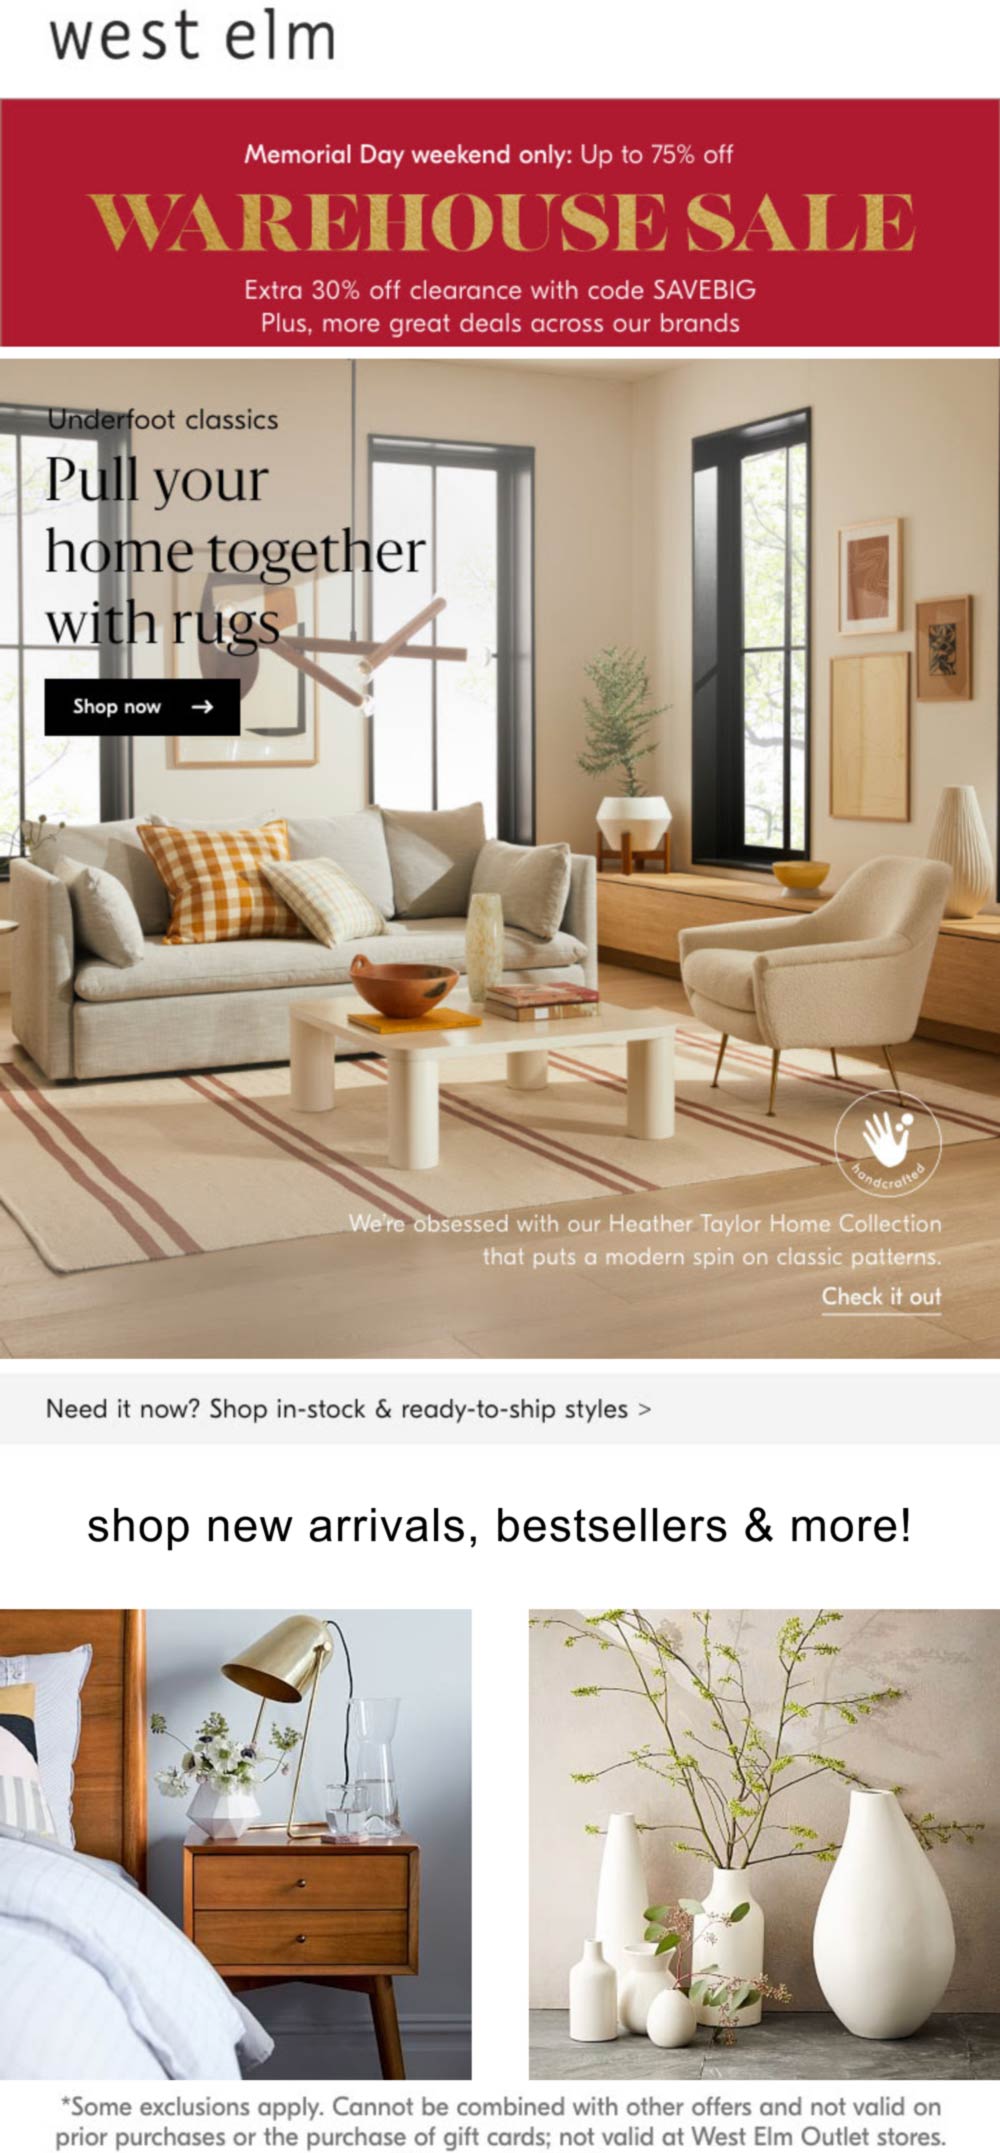 [April, 2022] Extra 30 off clearance today at West Elm furniture via promo code SAVEBIG 